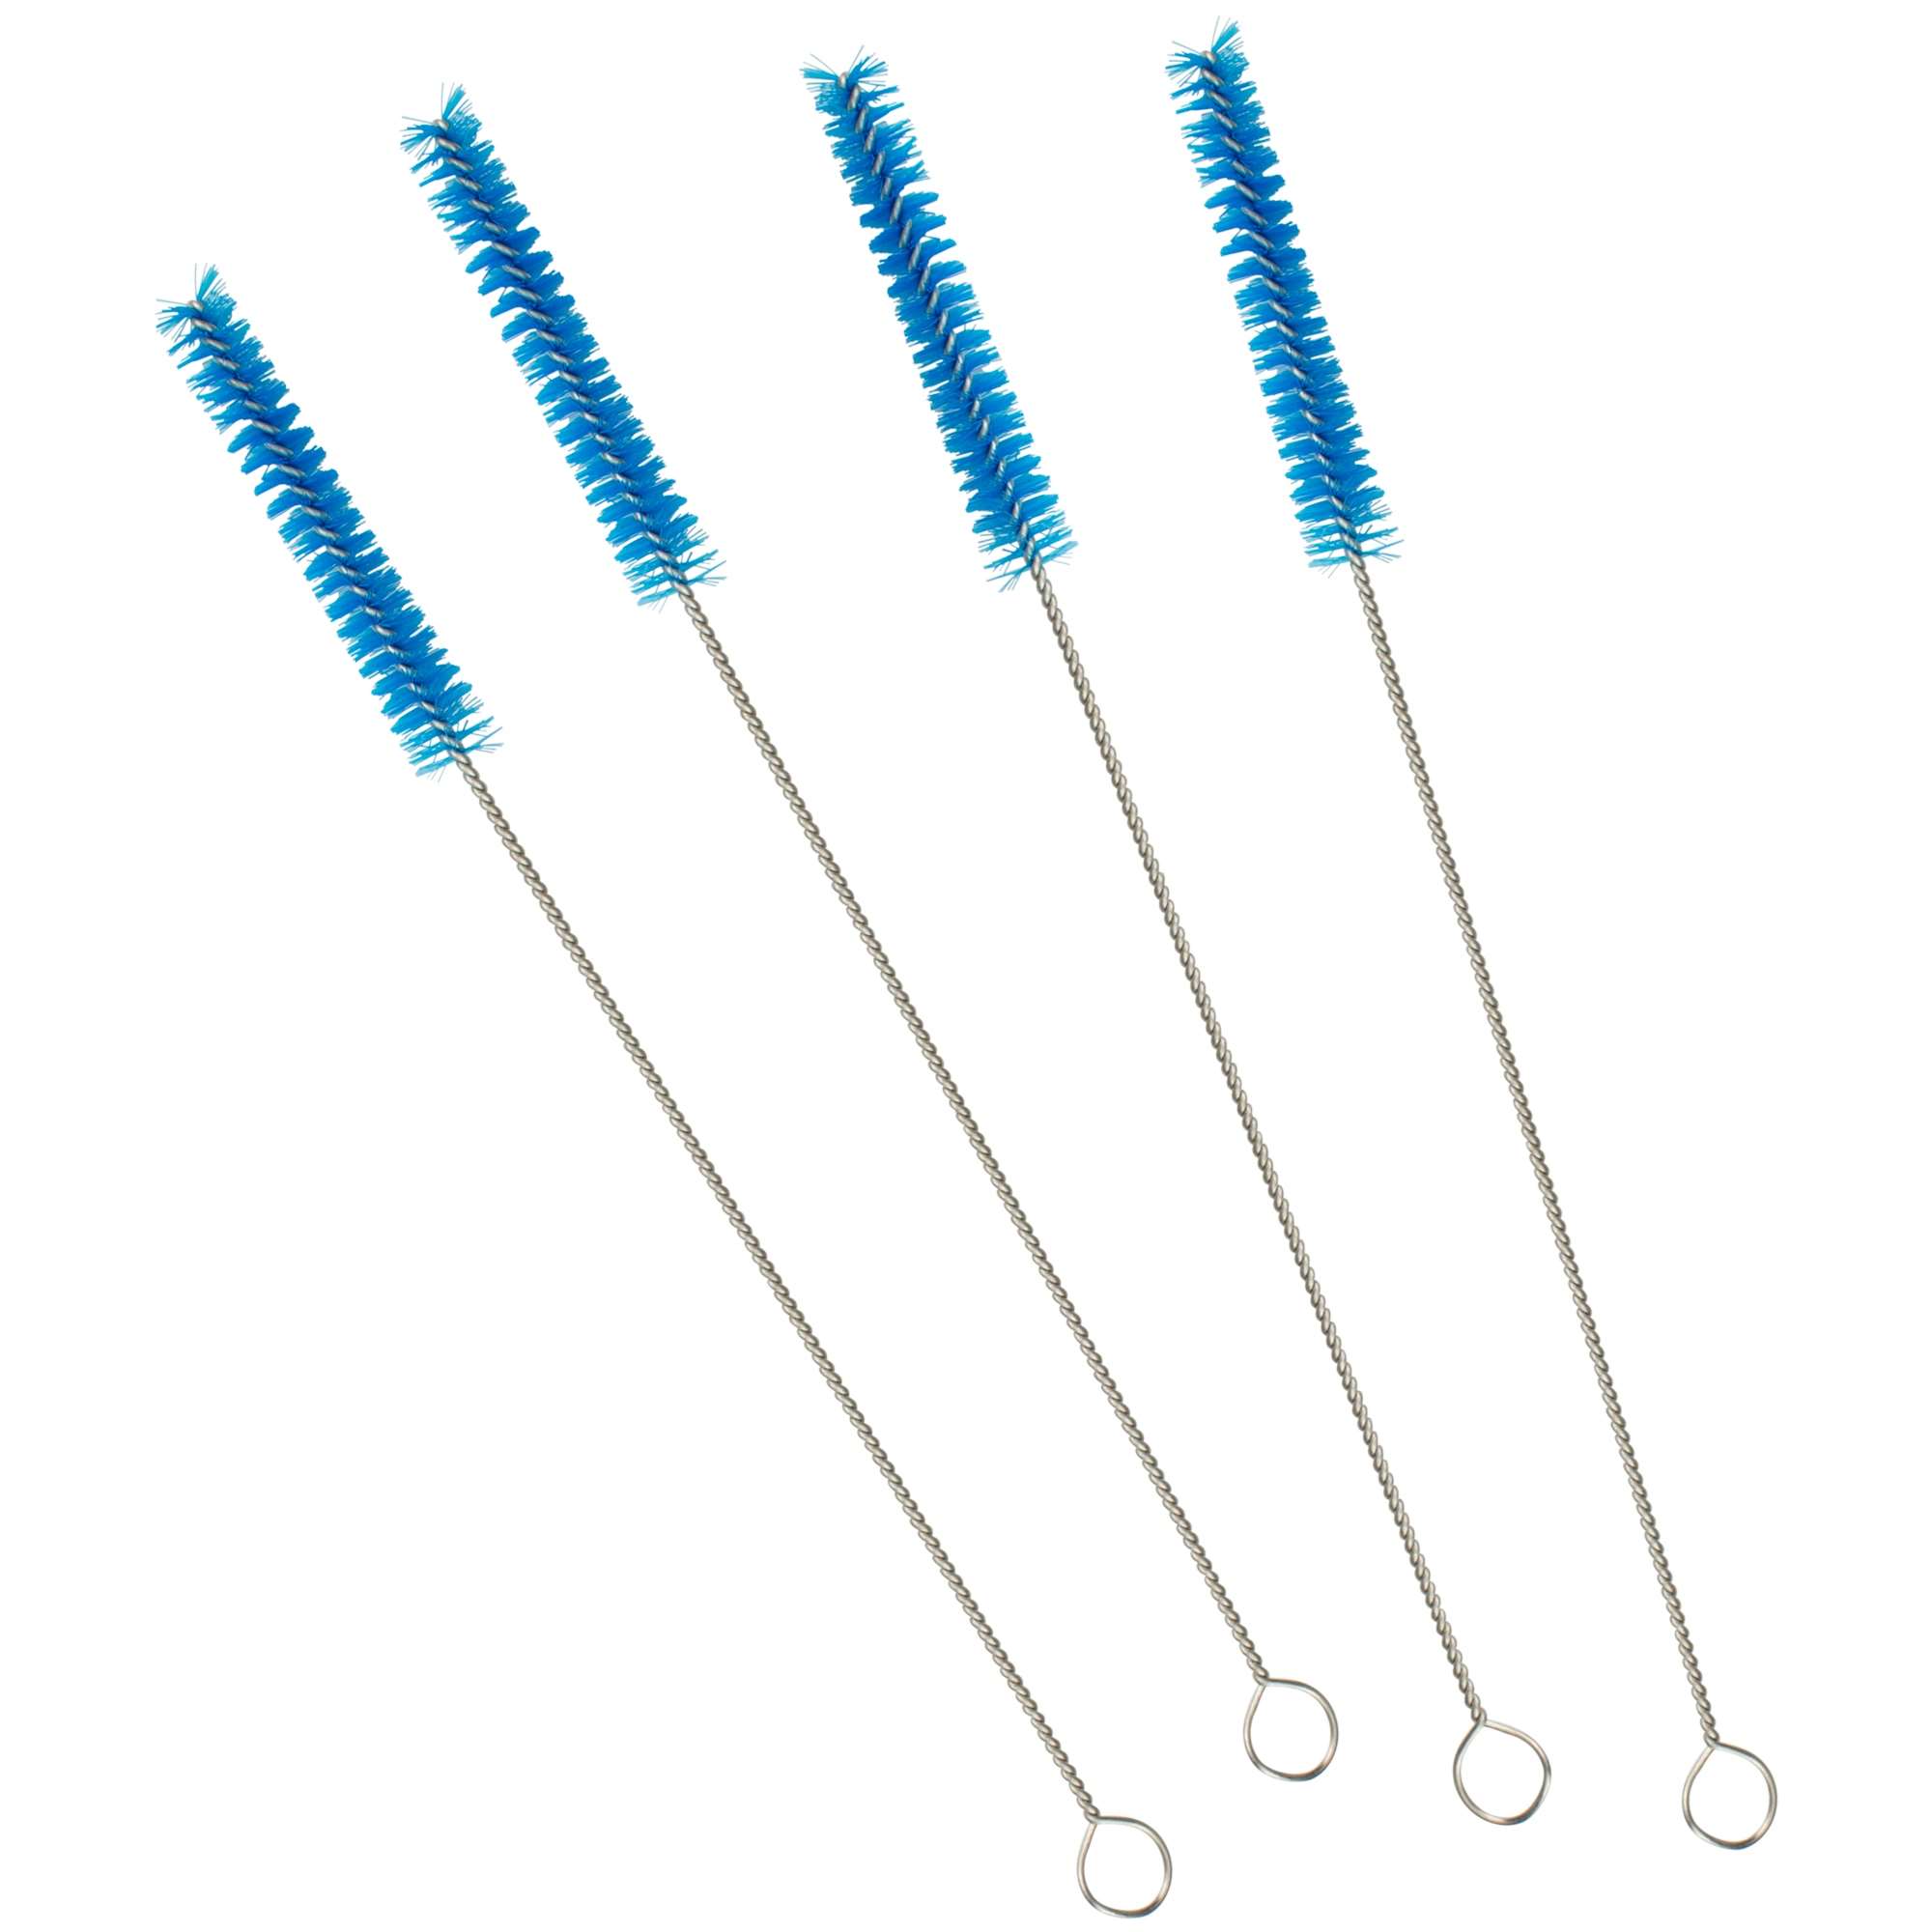 620_product_cleaning_brush_4-pack (1)